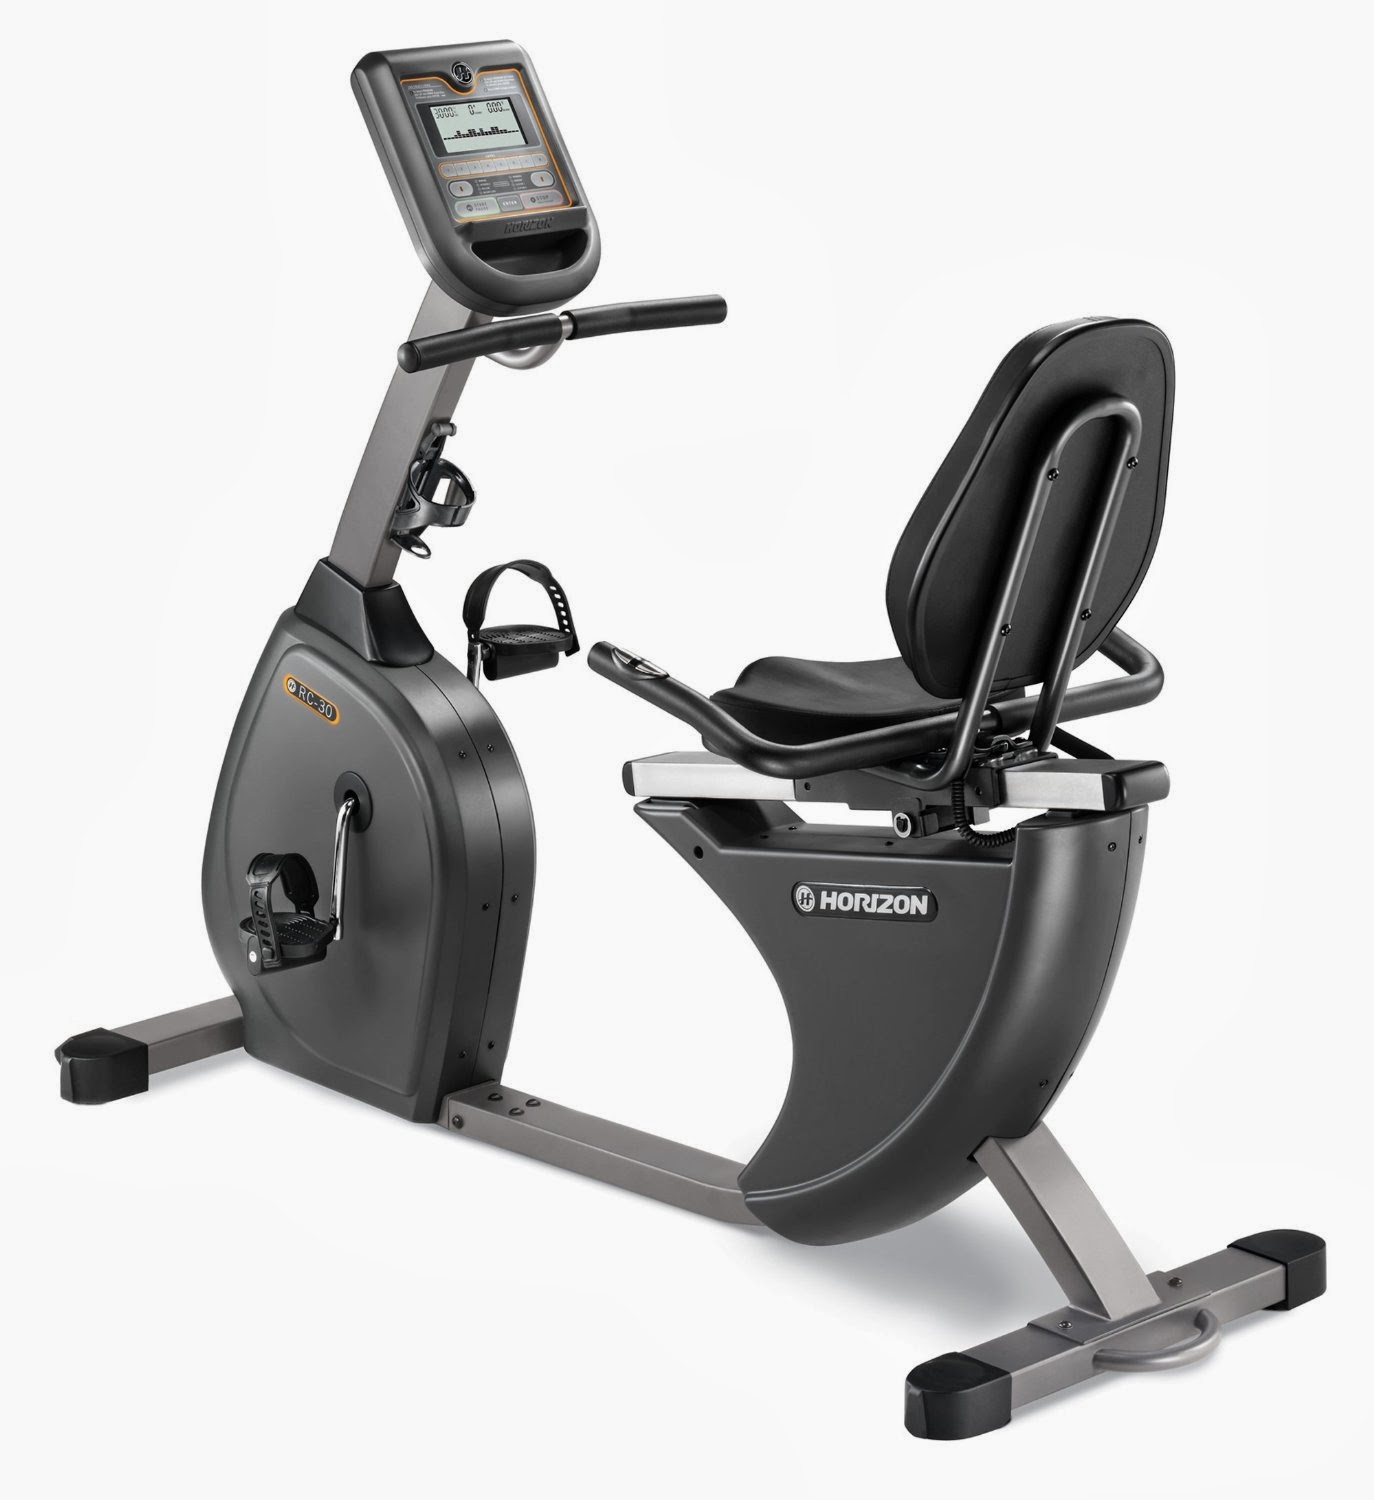 Horizon Fitness RC-30 Recumbent Exercise Bike, review of features, comfortable back support seat, low impact exercise,